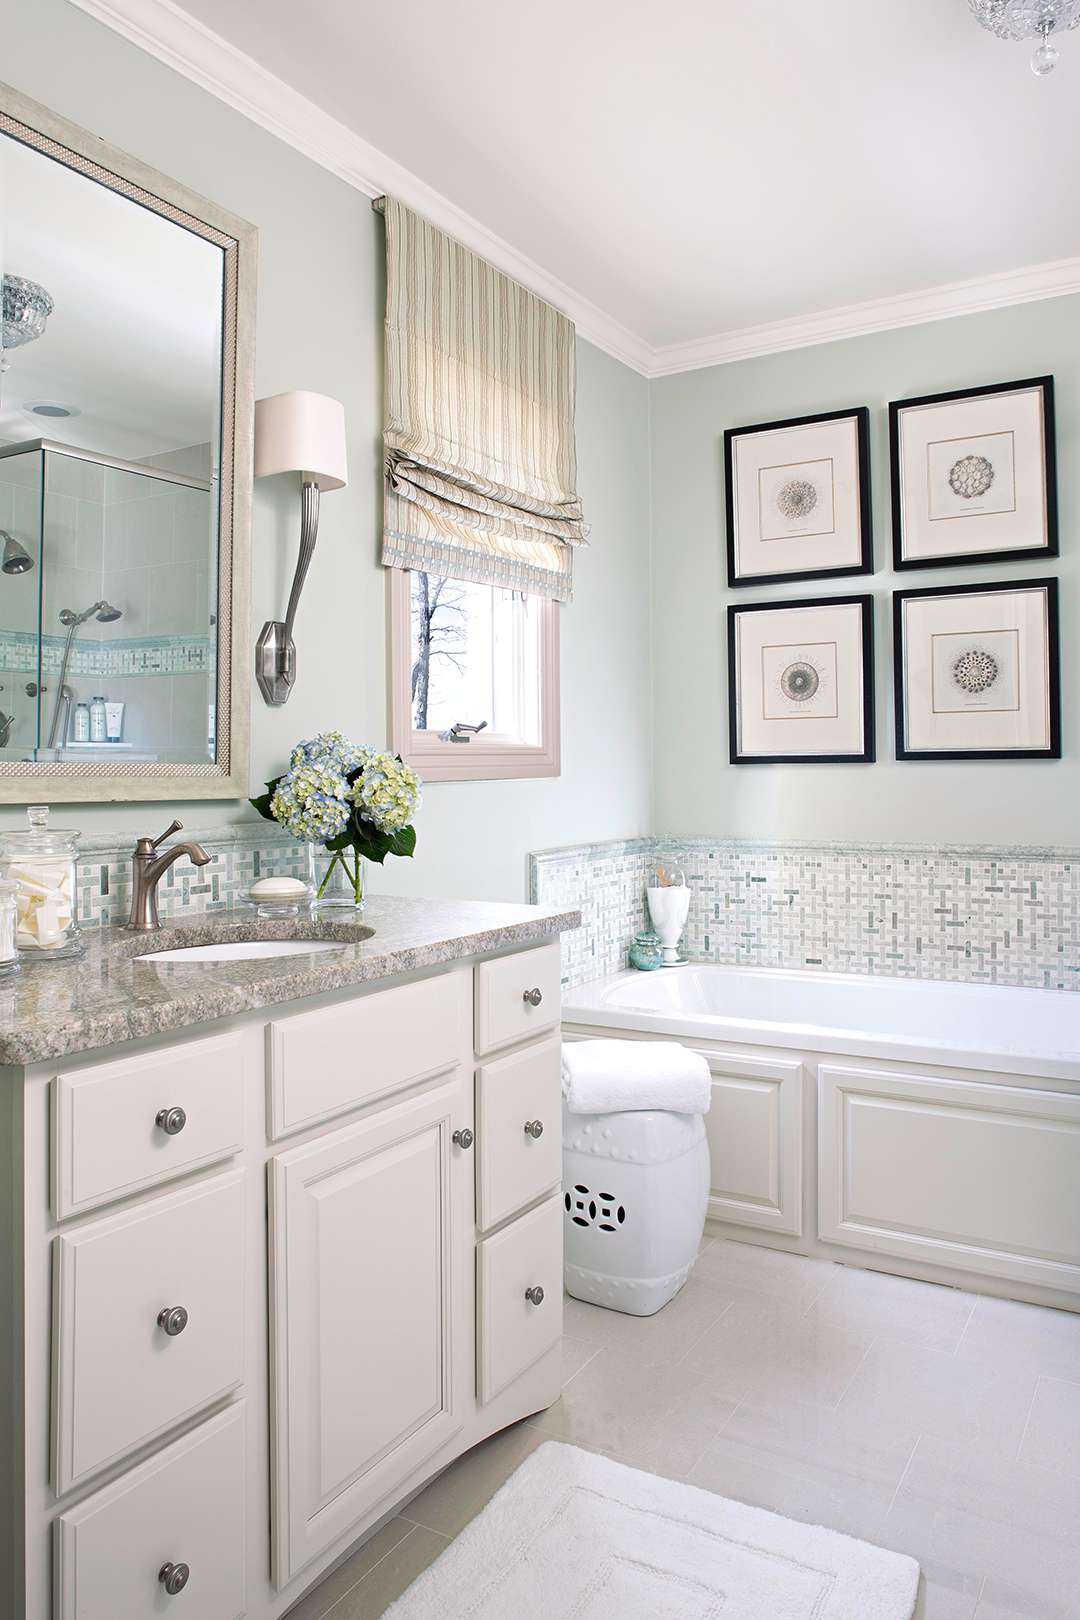 12 Popular Bathroom Paint Colors Our Editors Swear By ...